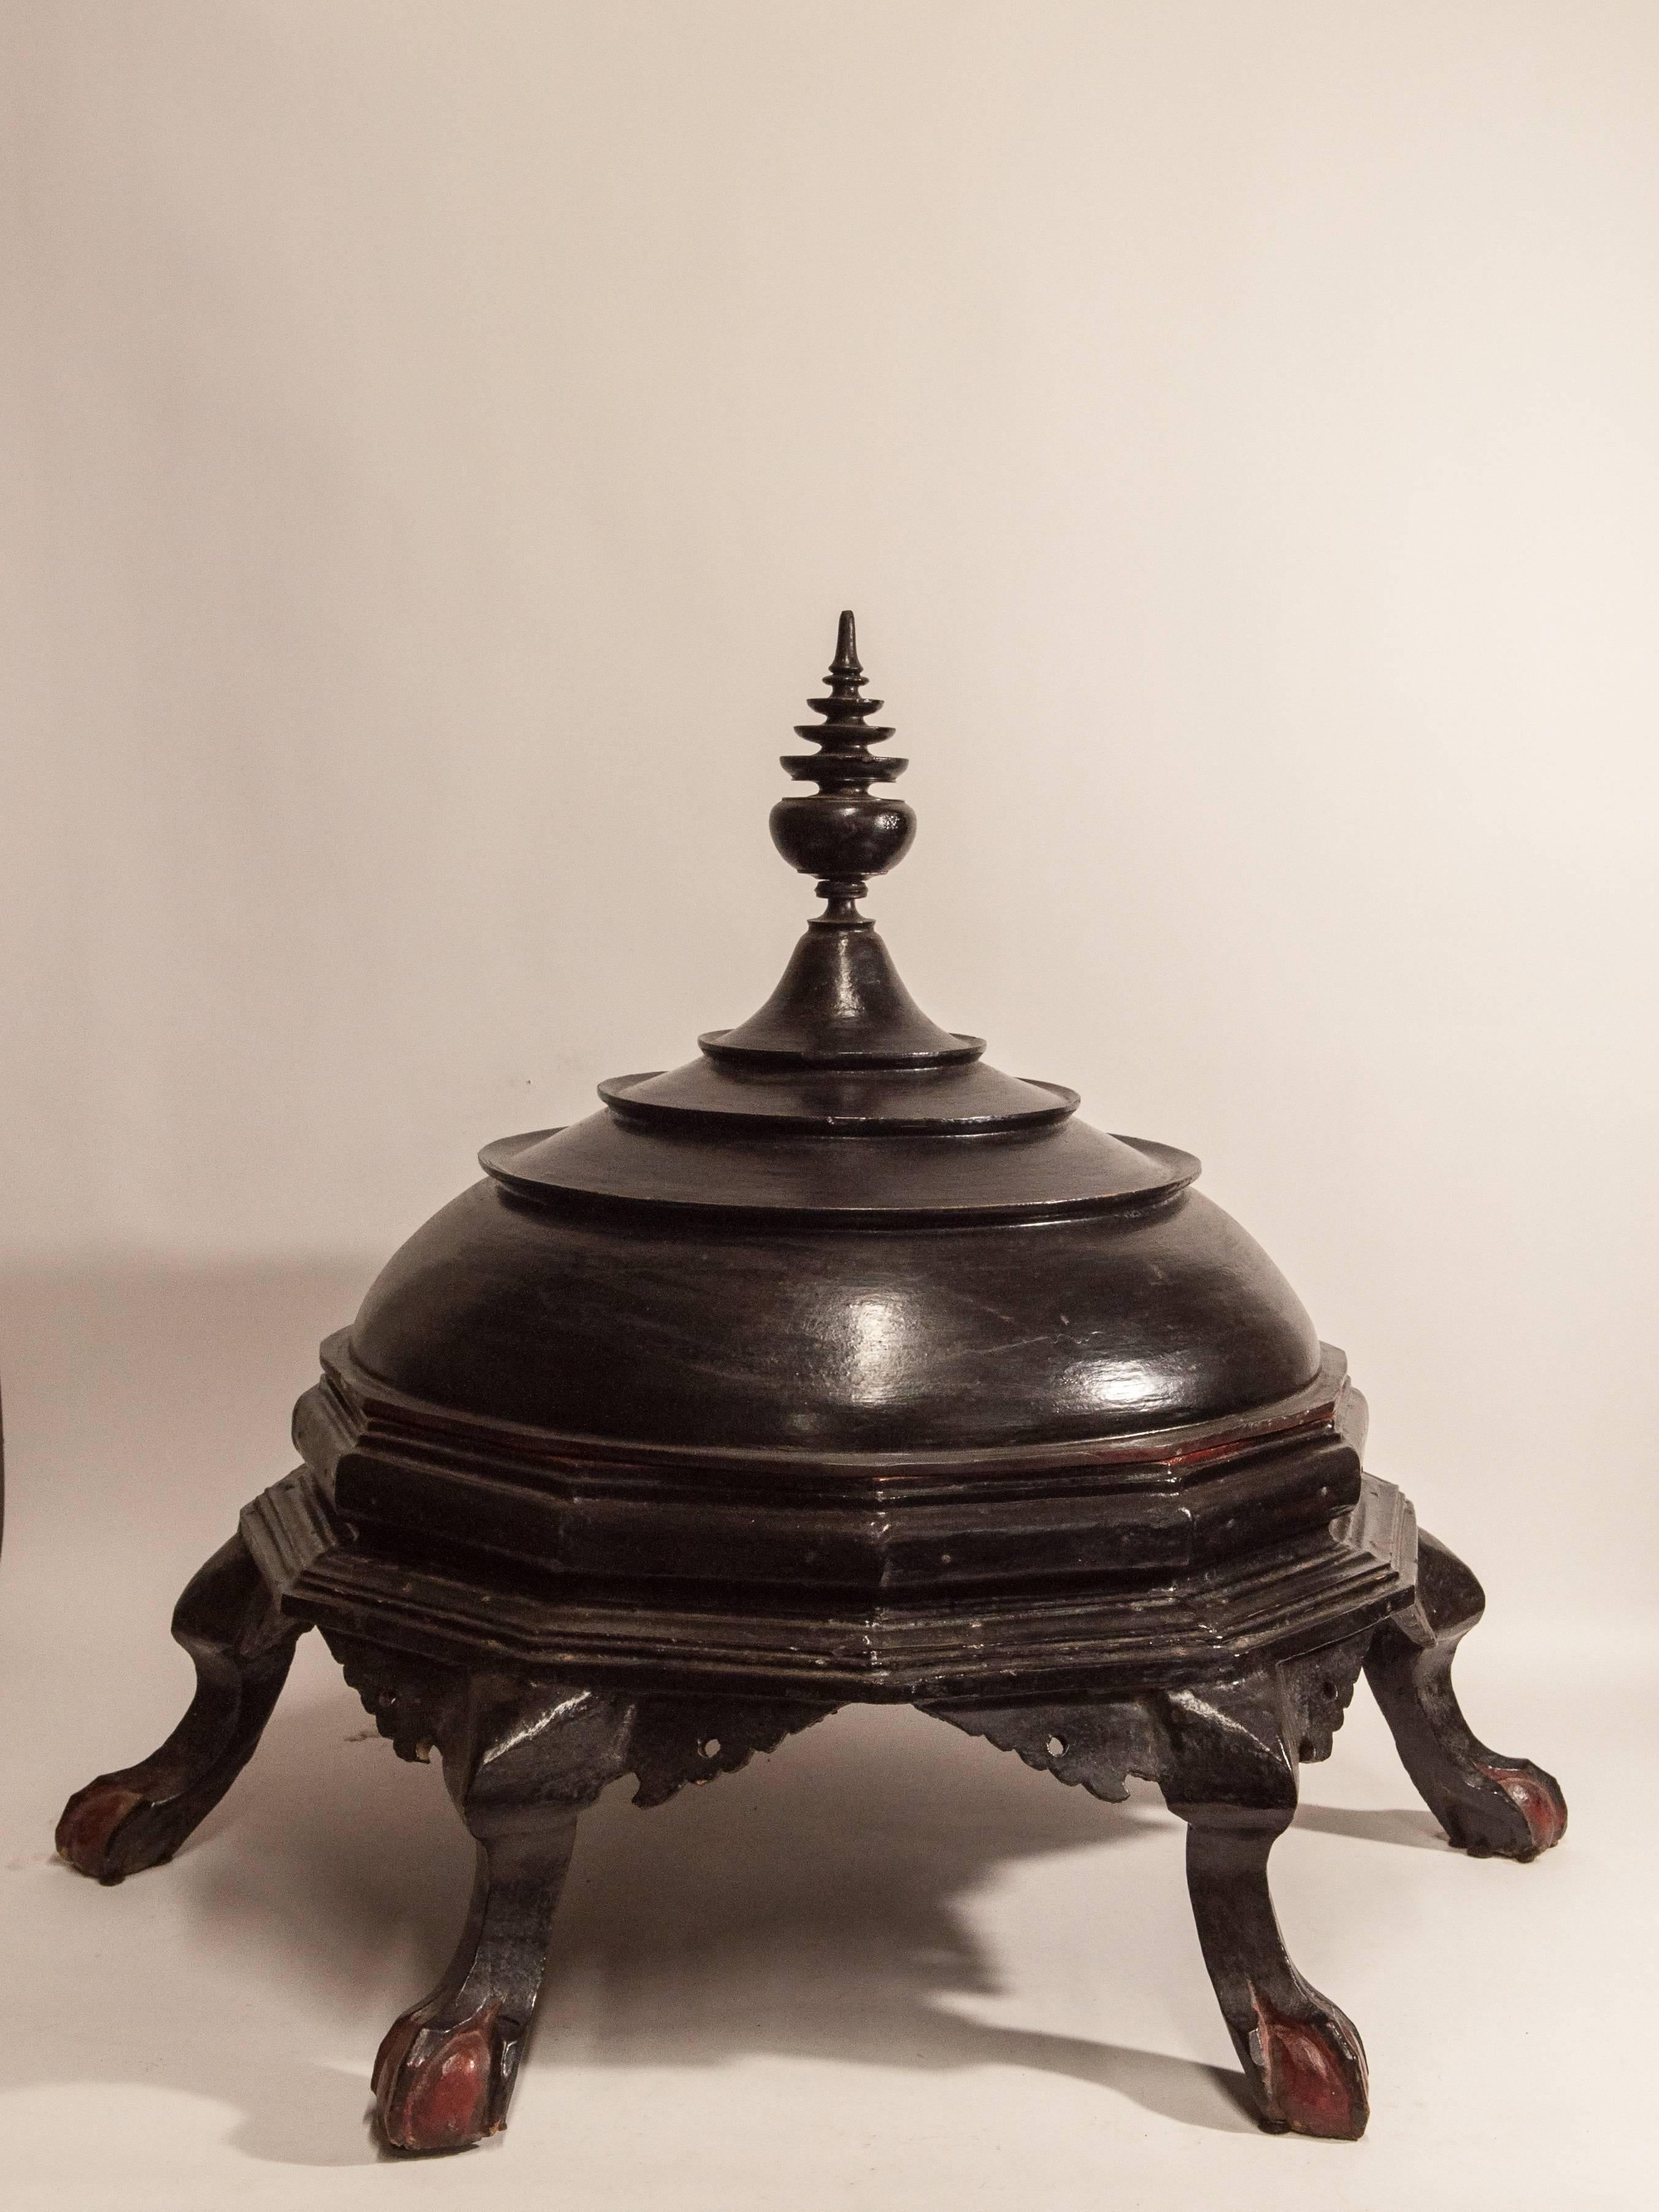 Giant Black Lacquer Offering Tray, Hsun Ok, from Burma Early to Mid-20th Century 1